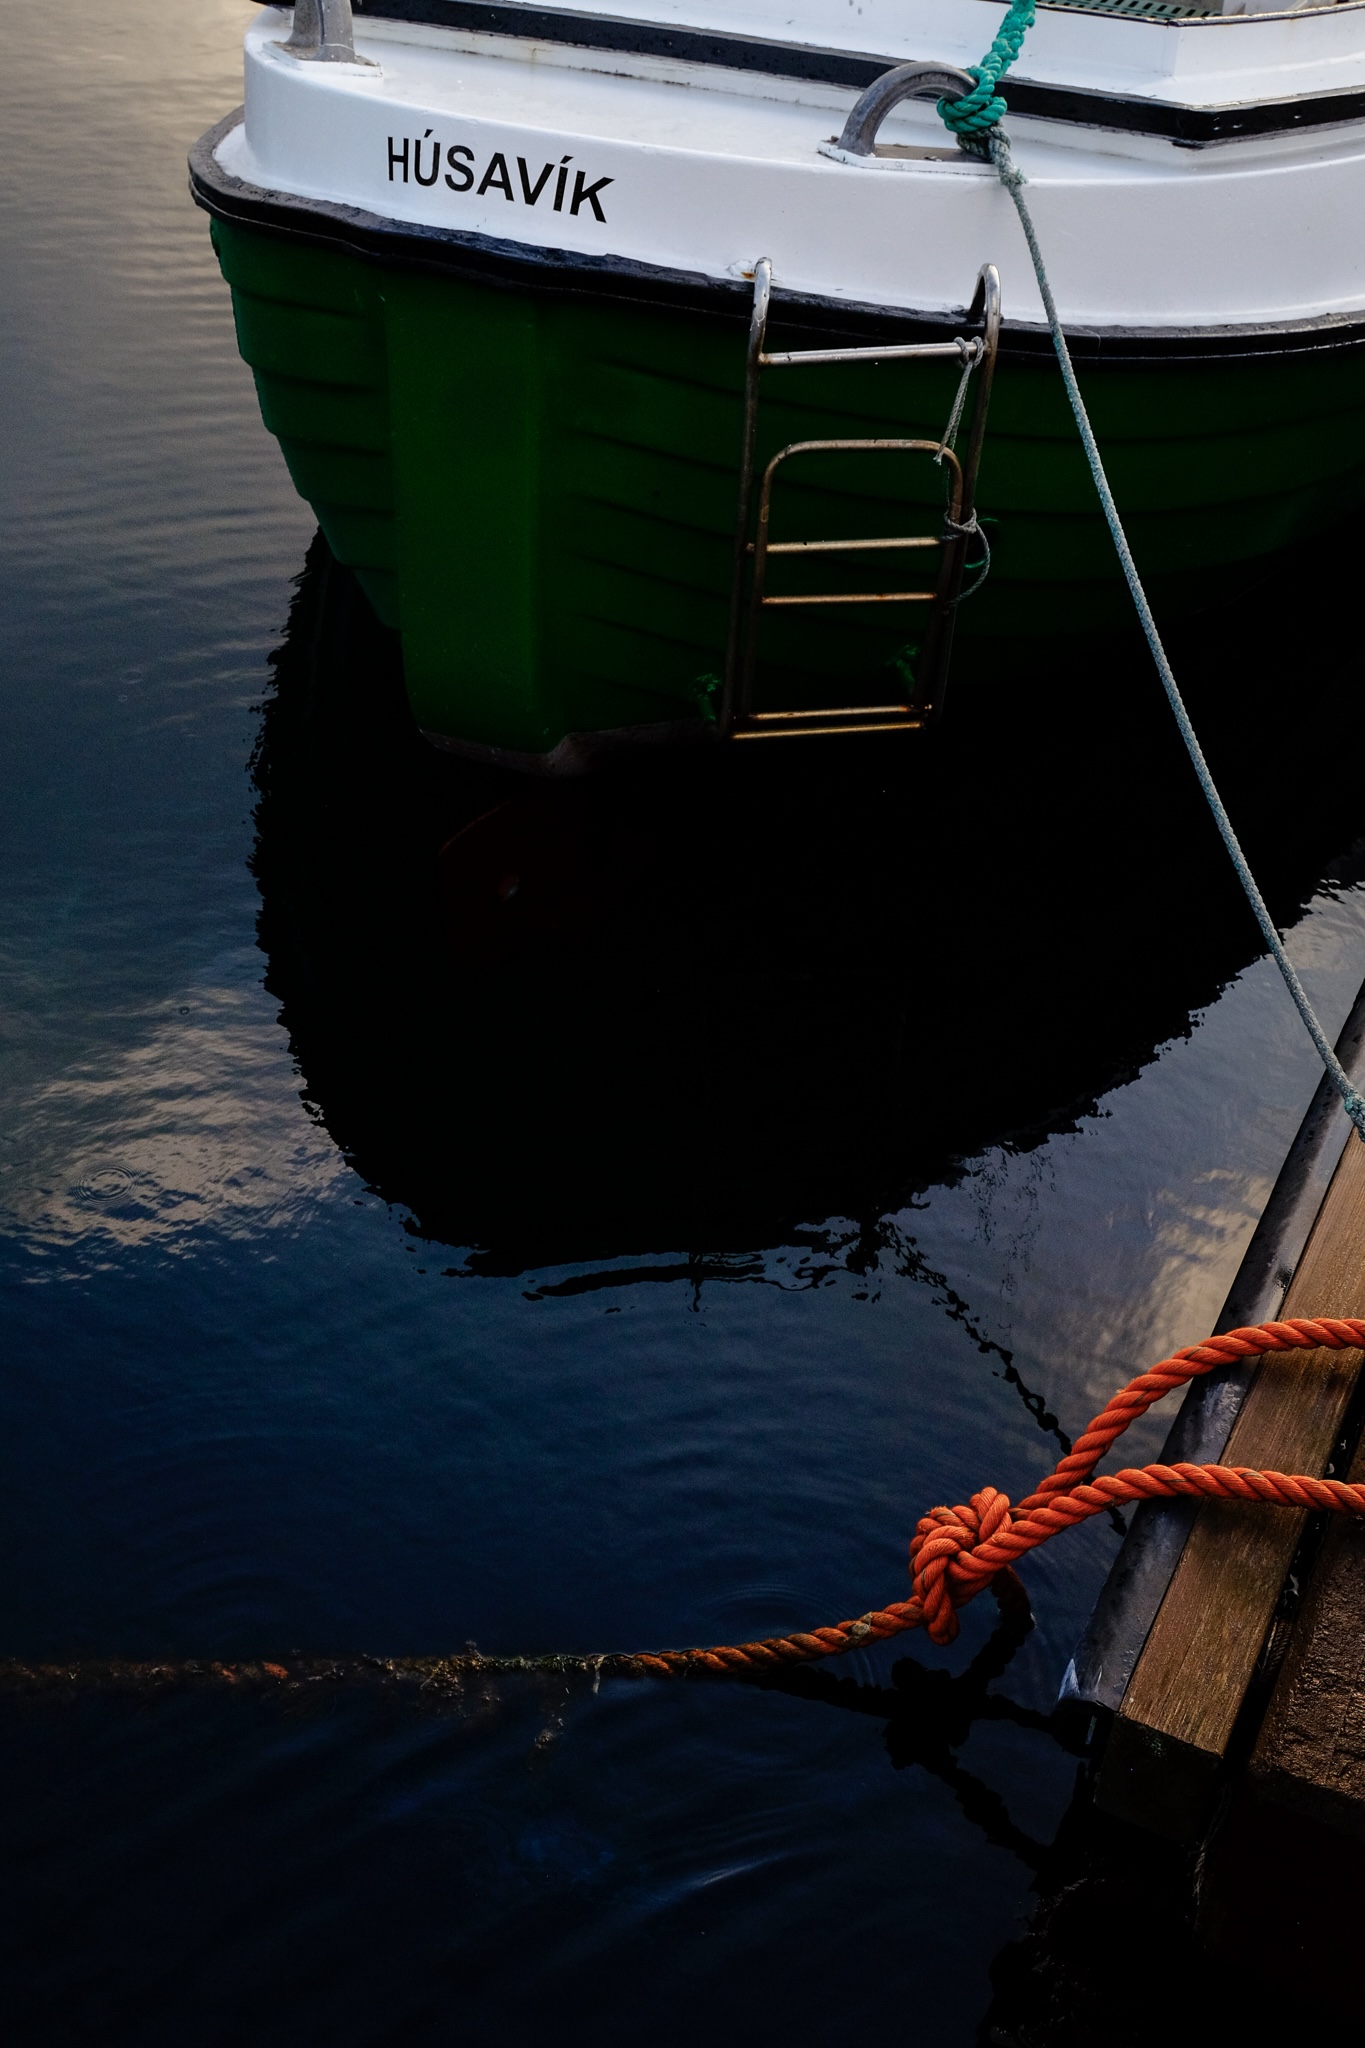 Deep green boat named Husavik against dark blue water in the harbour with bright orange rope holding another boat moored to the dock